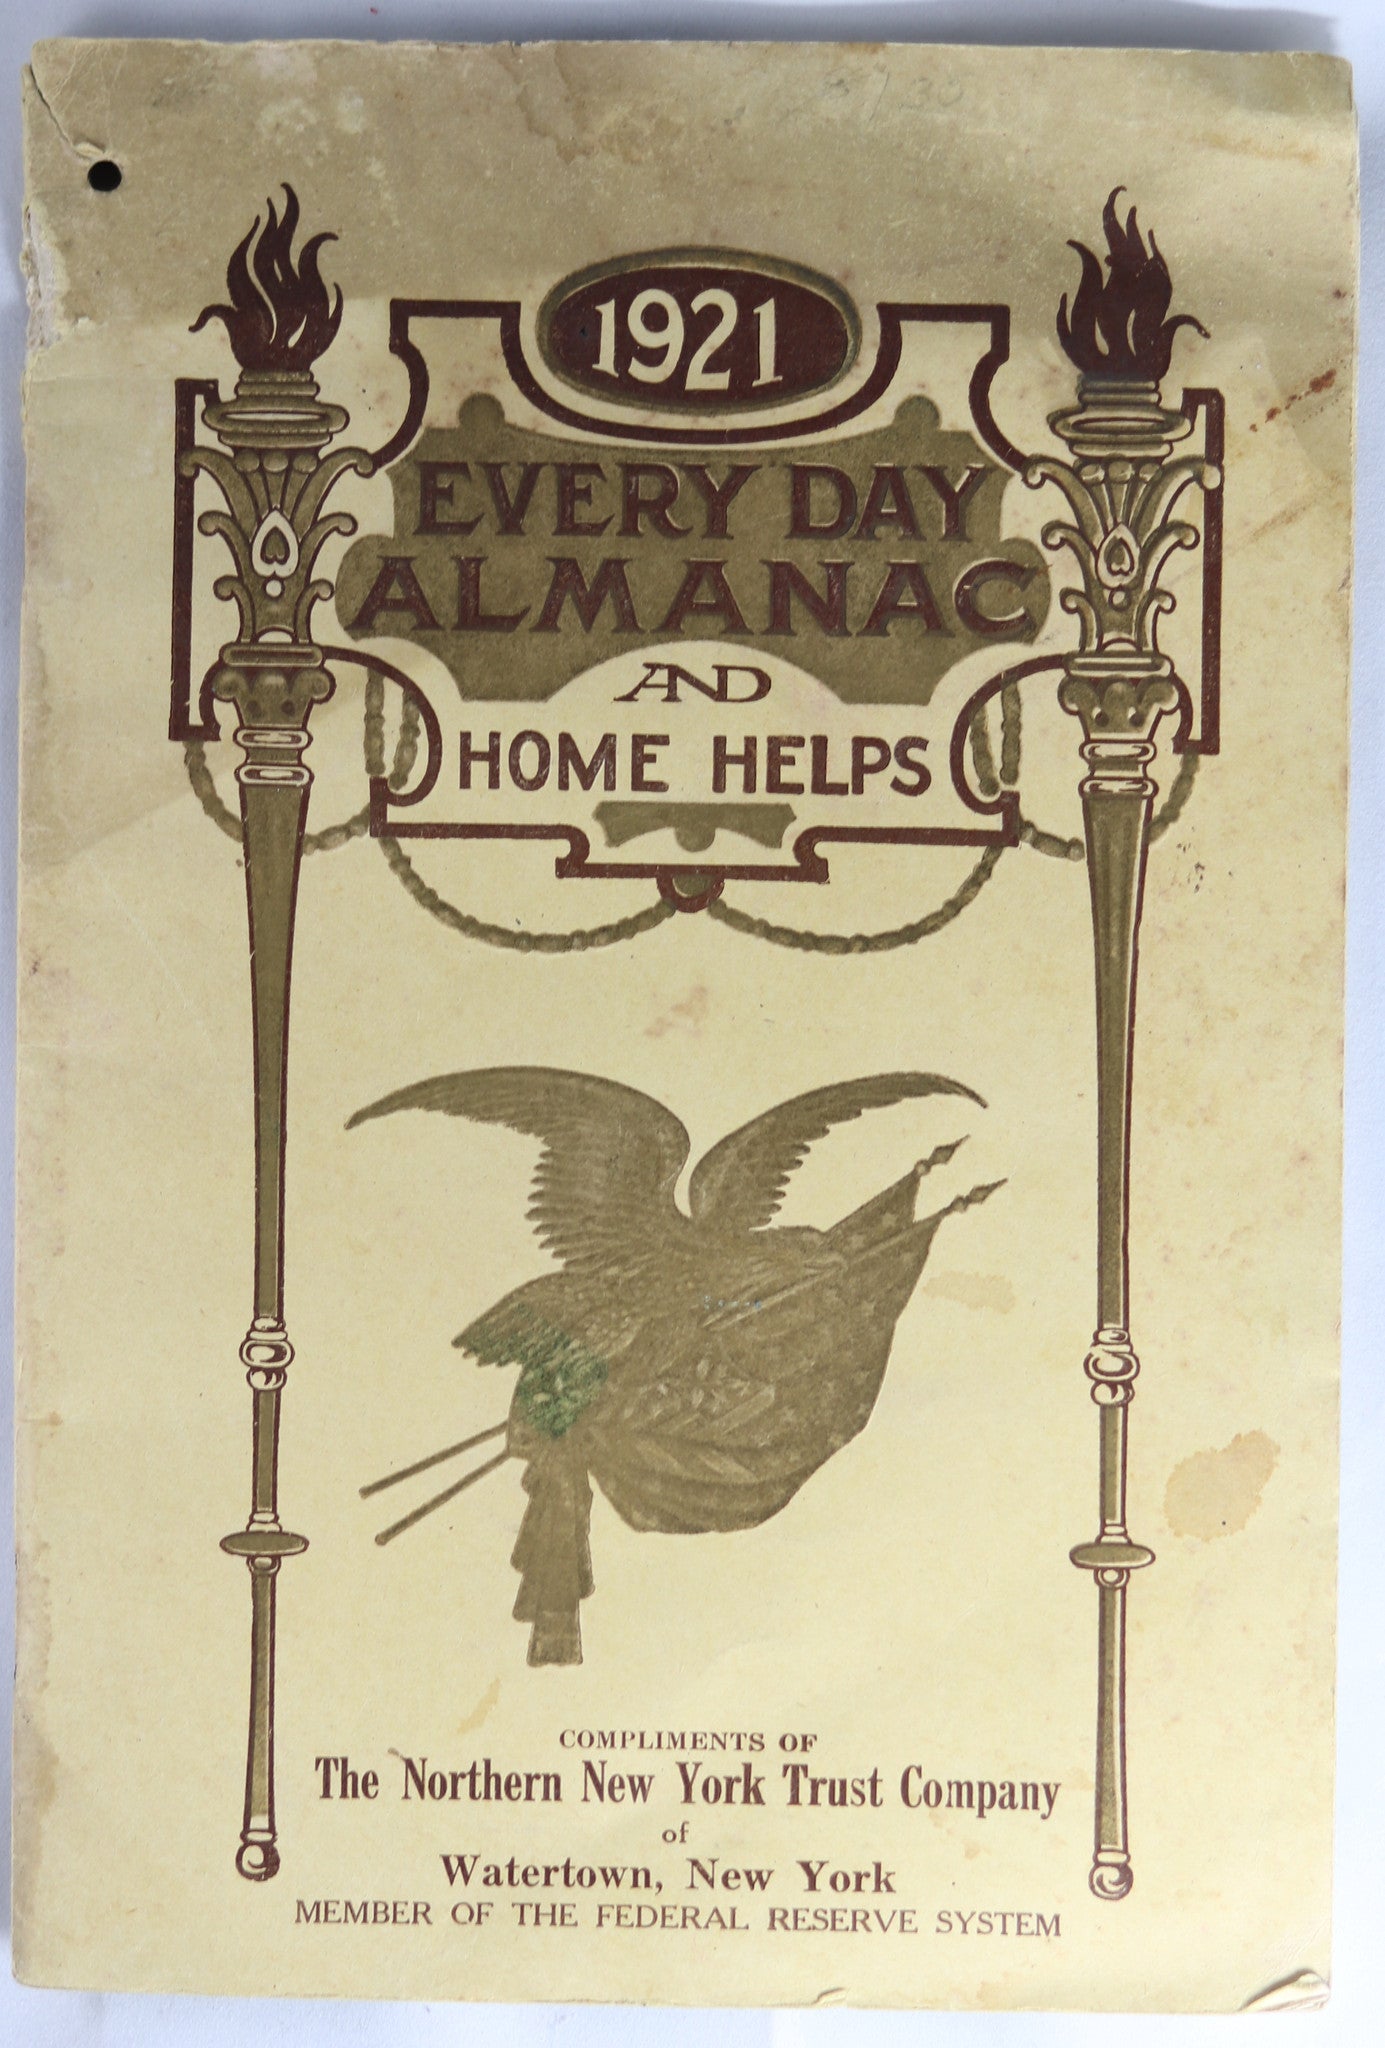 1921 'Every Day Almanac and Home Helps' NY Trust